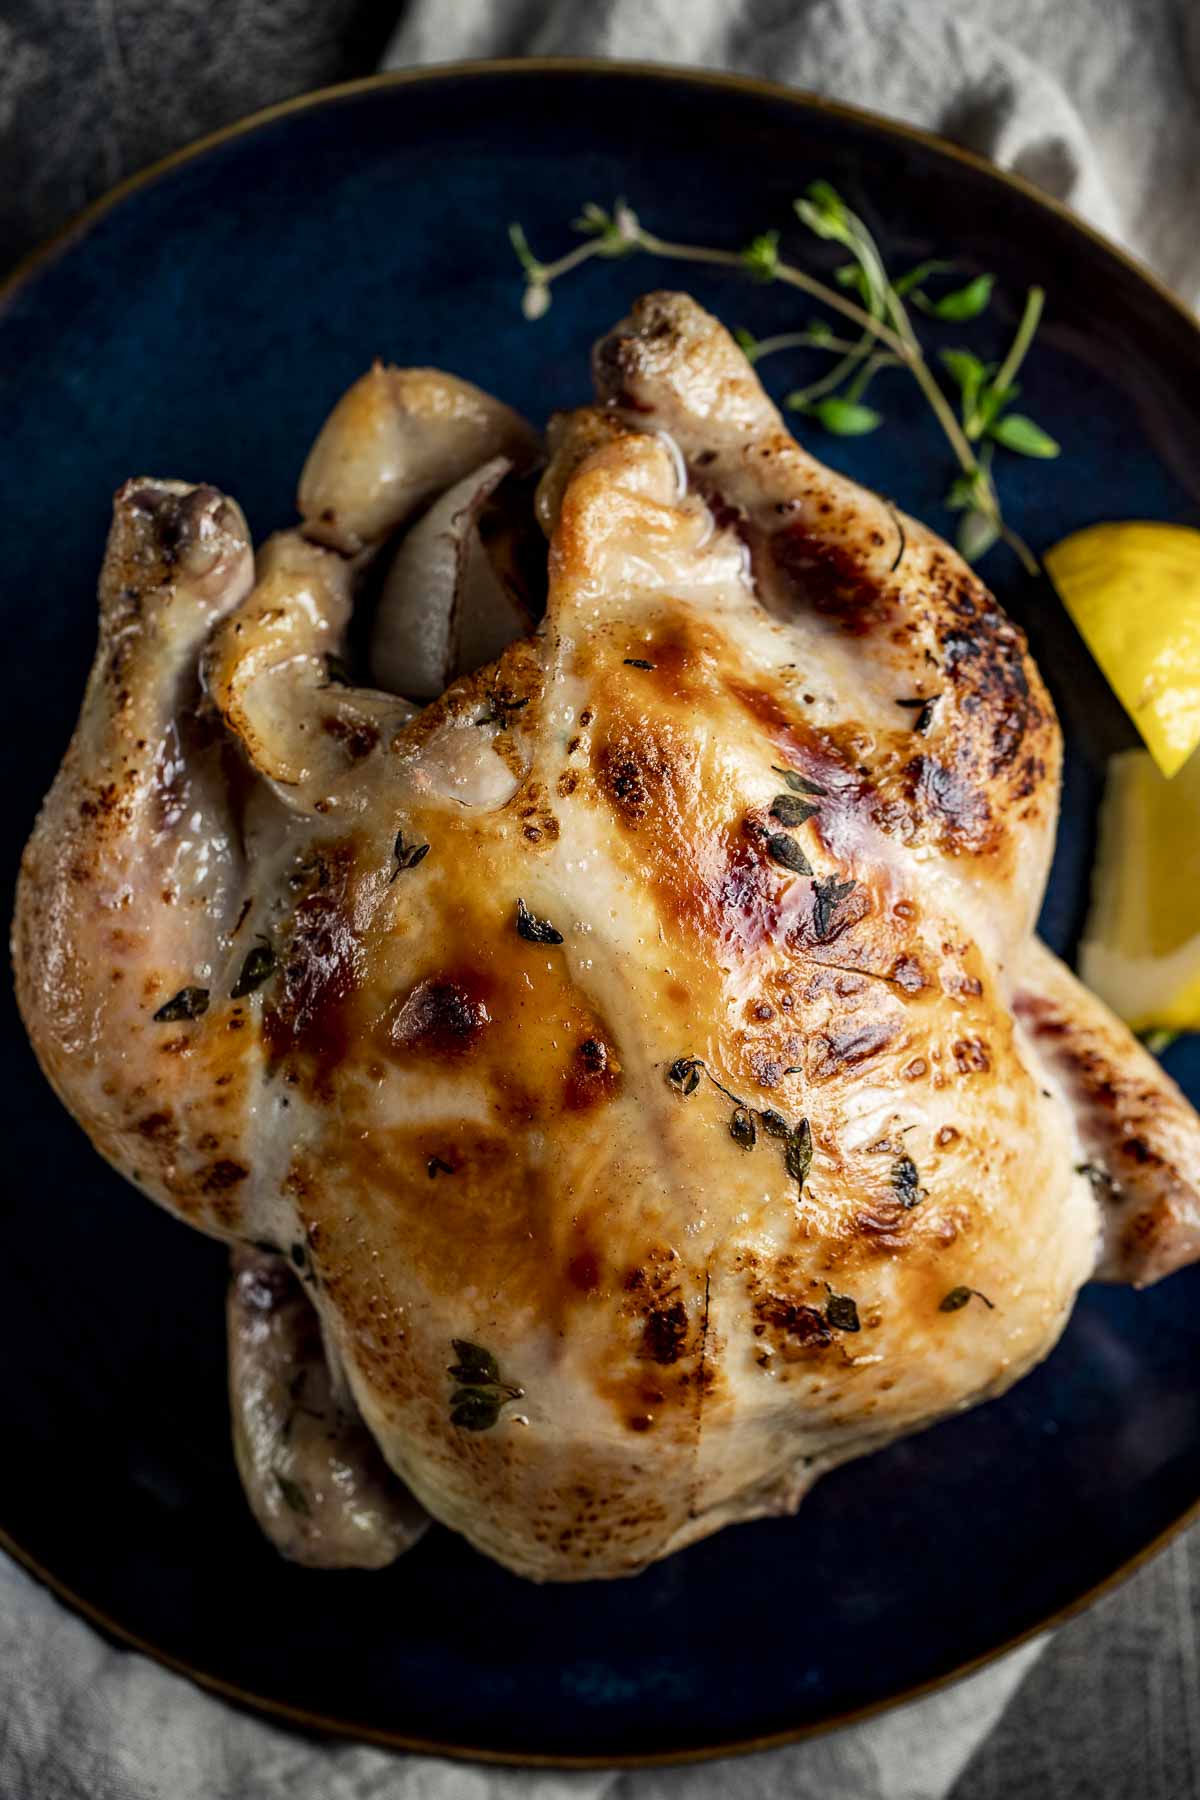 Overhead view of a whole chicken with crispy golden skin.